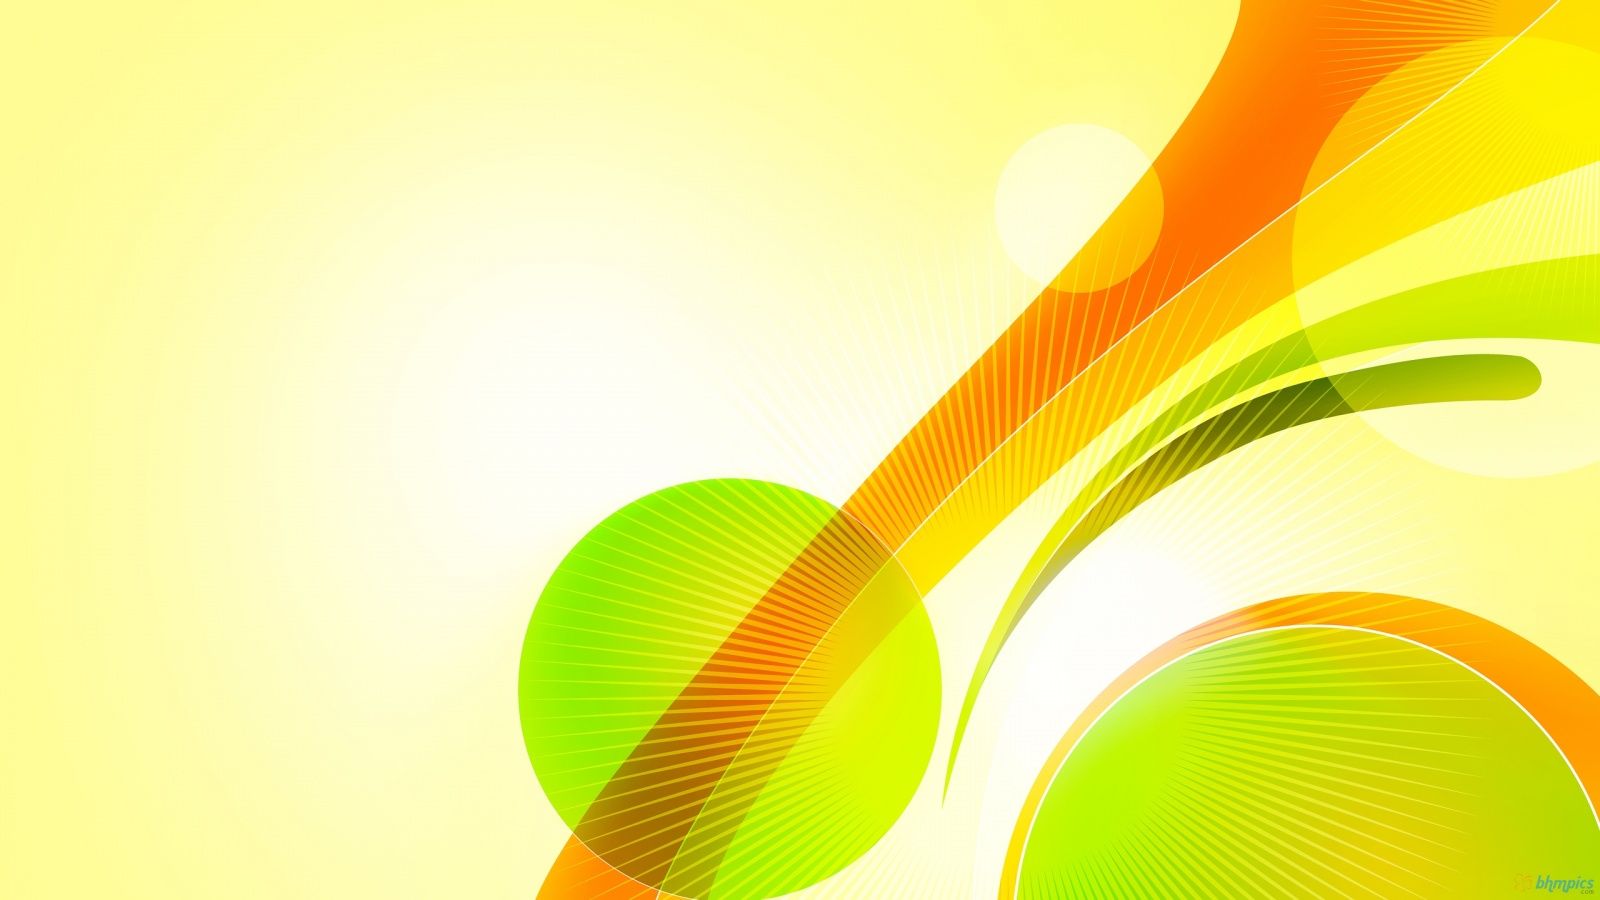 Great colourful abstract For Facebook Walls Get Latest Backgrounds